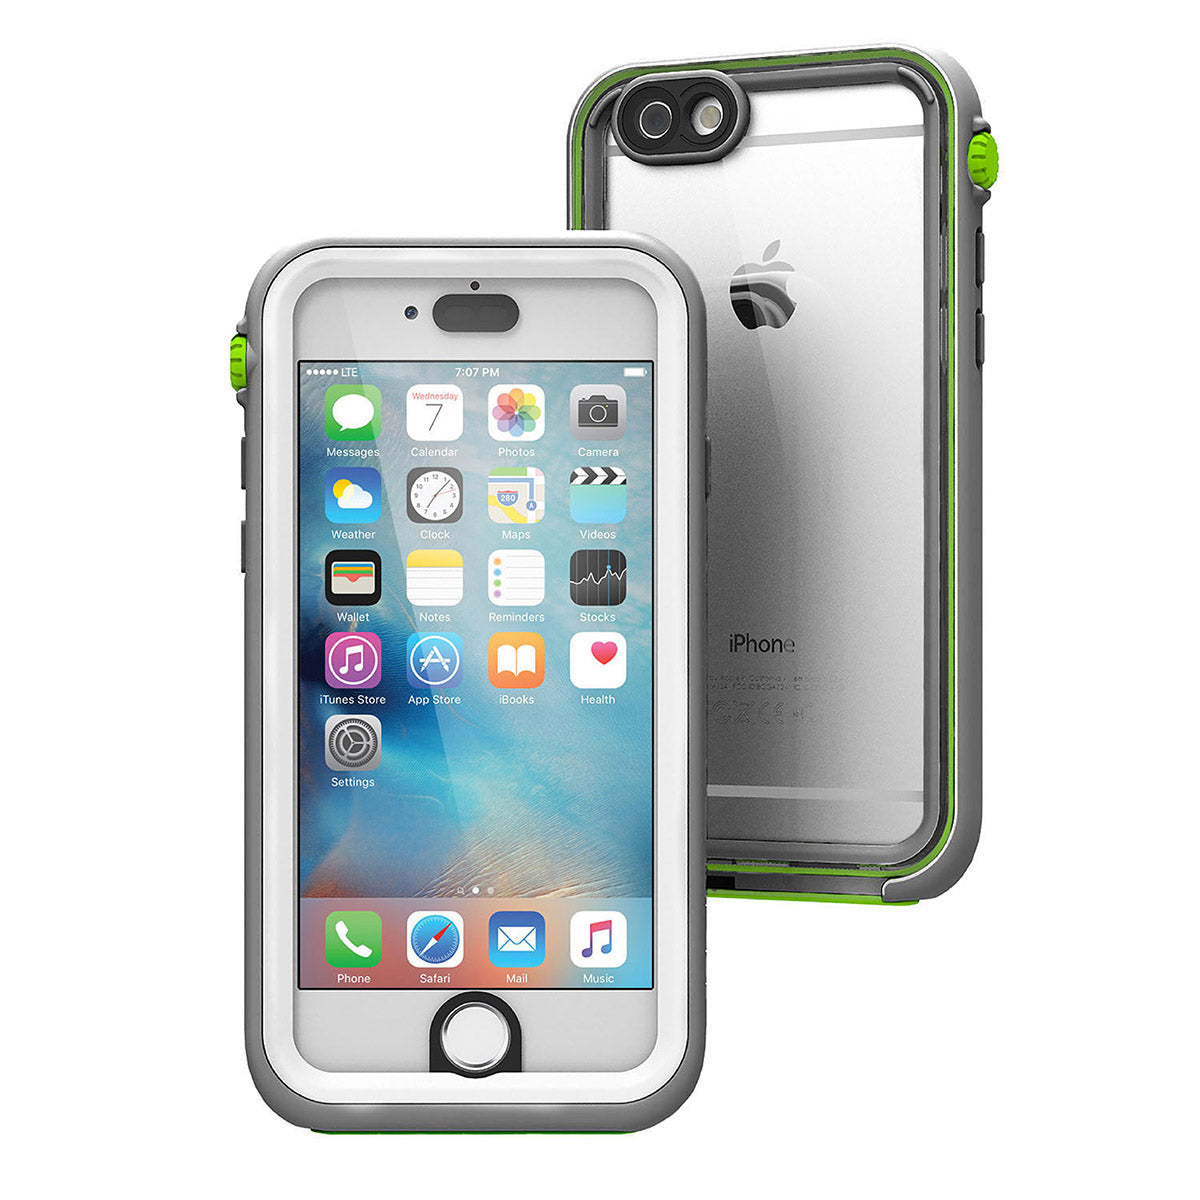 Catalyst iphone 6s waterproof case showing front and back view of the case in green pop colorway